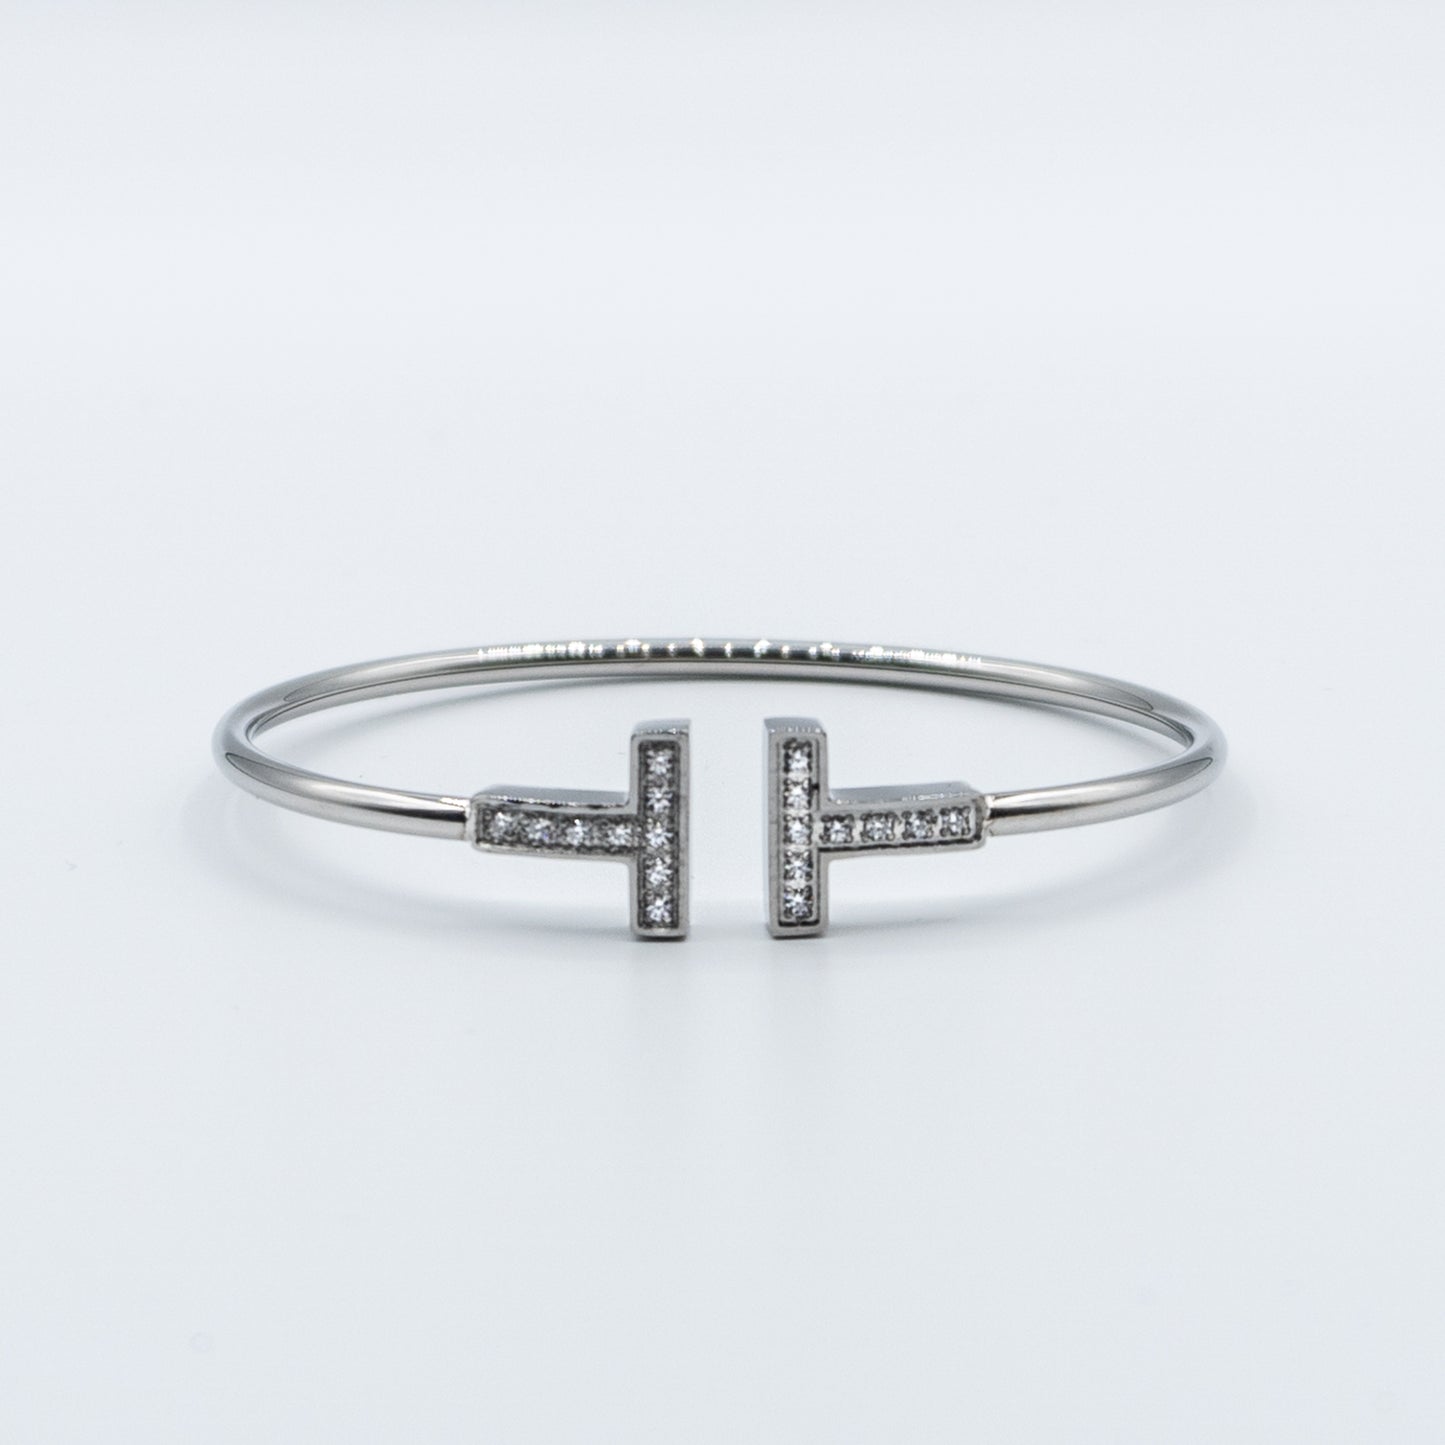 Stainless steel T bangle